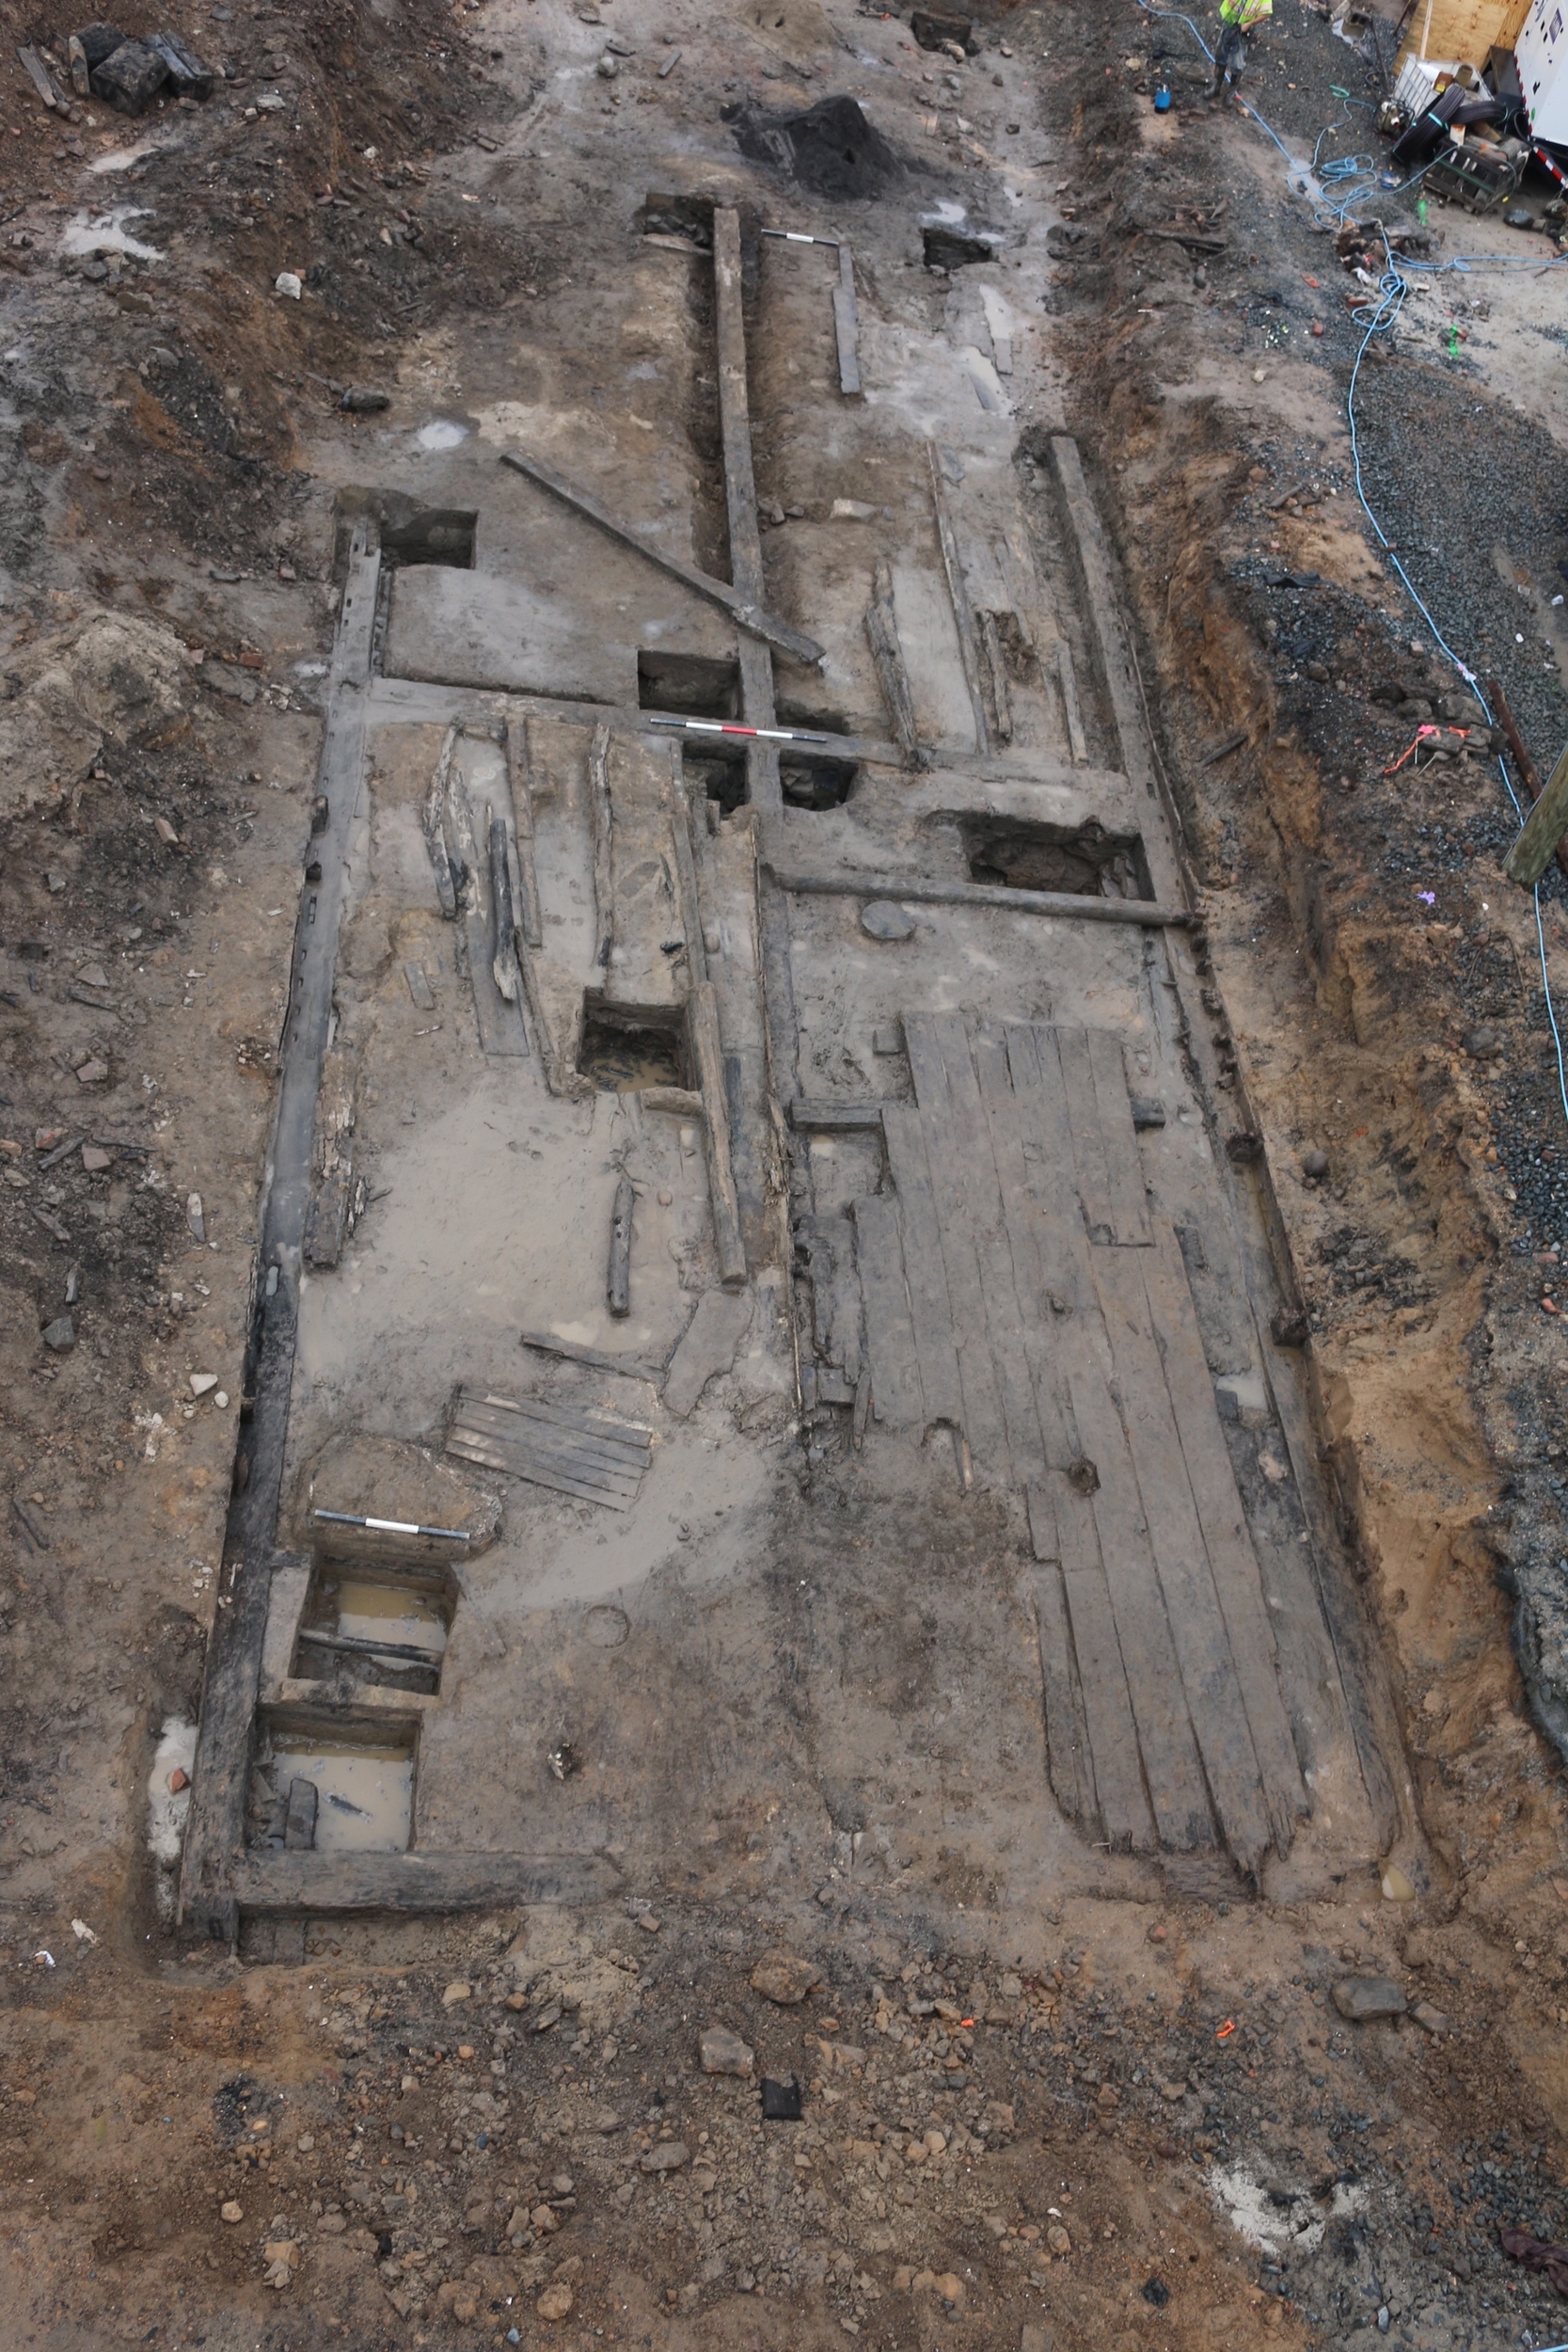  Aerial view of the remnants of the Carlyle warehouse, Alexandria’s first public warehouse constructed around 1755.       